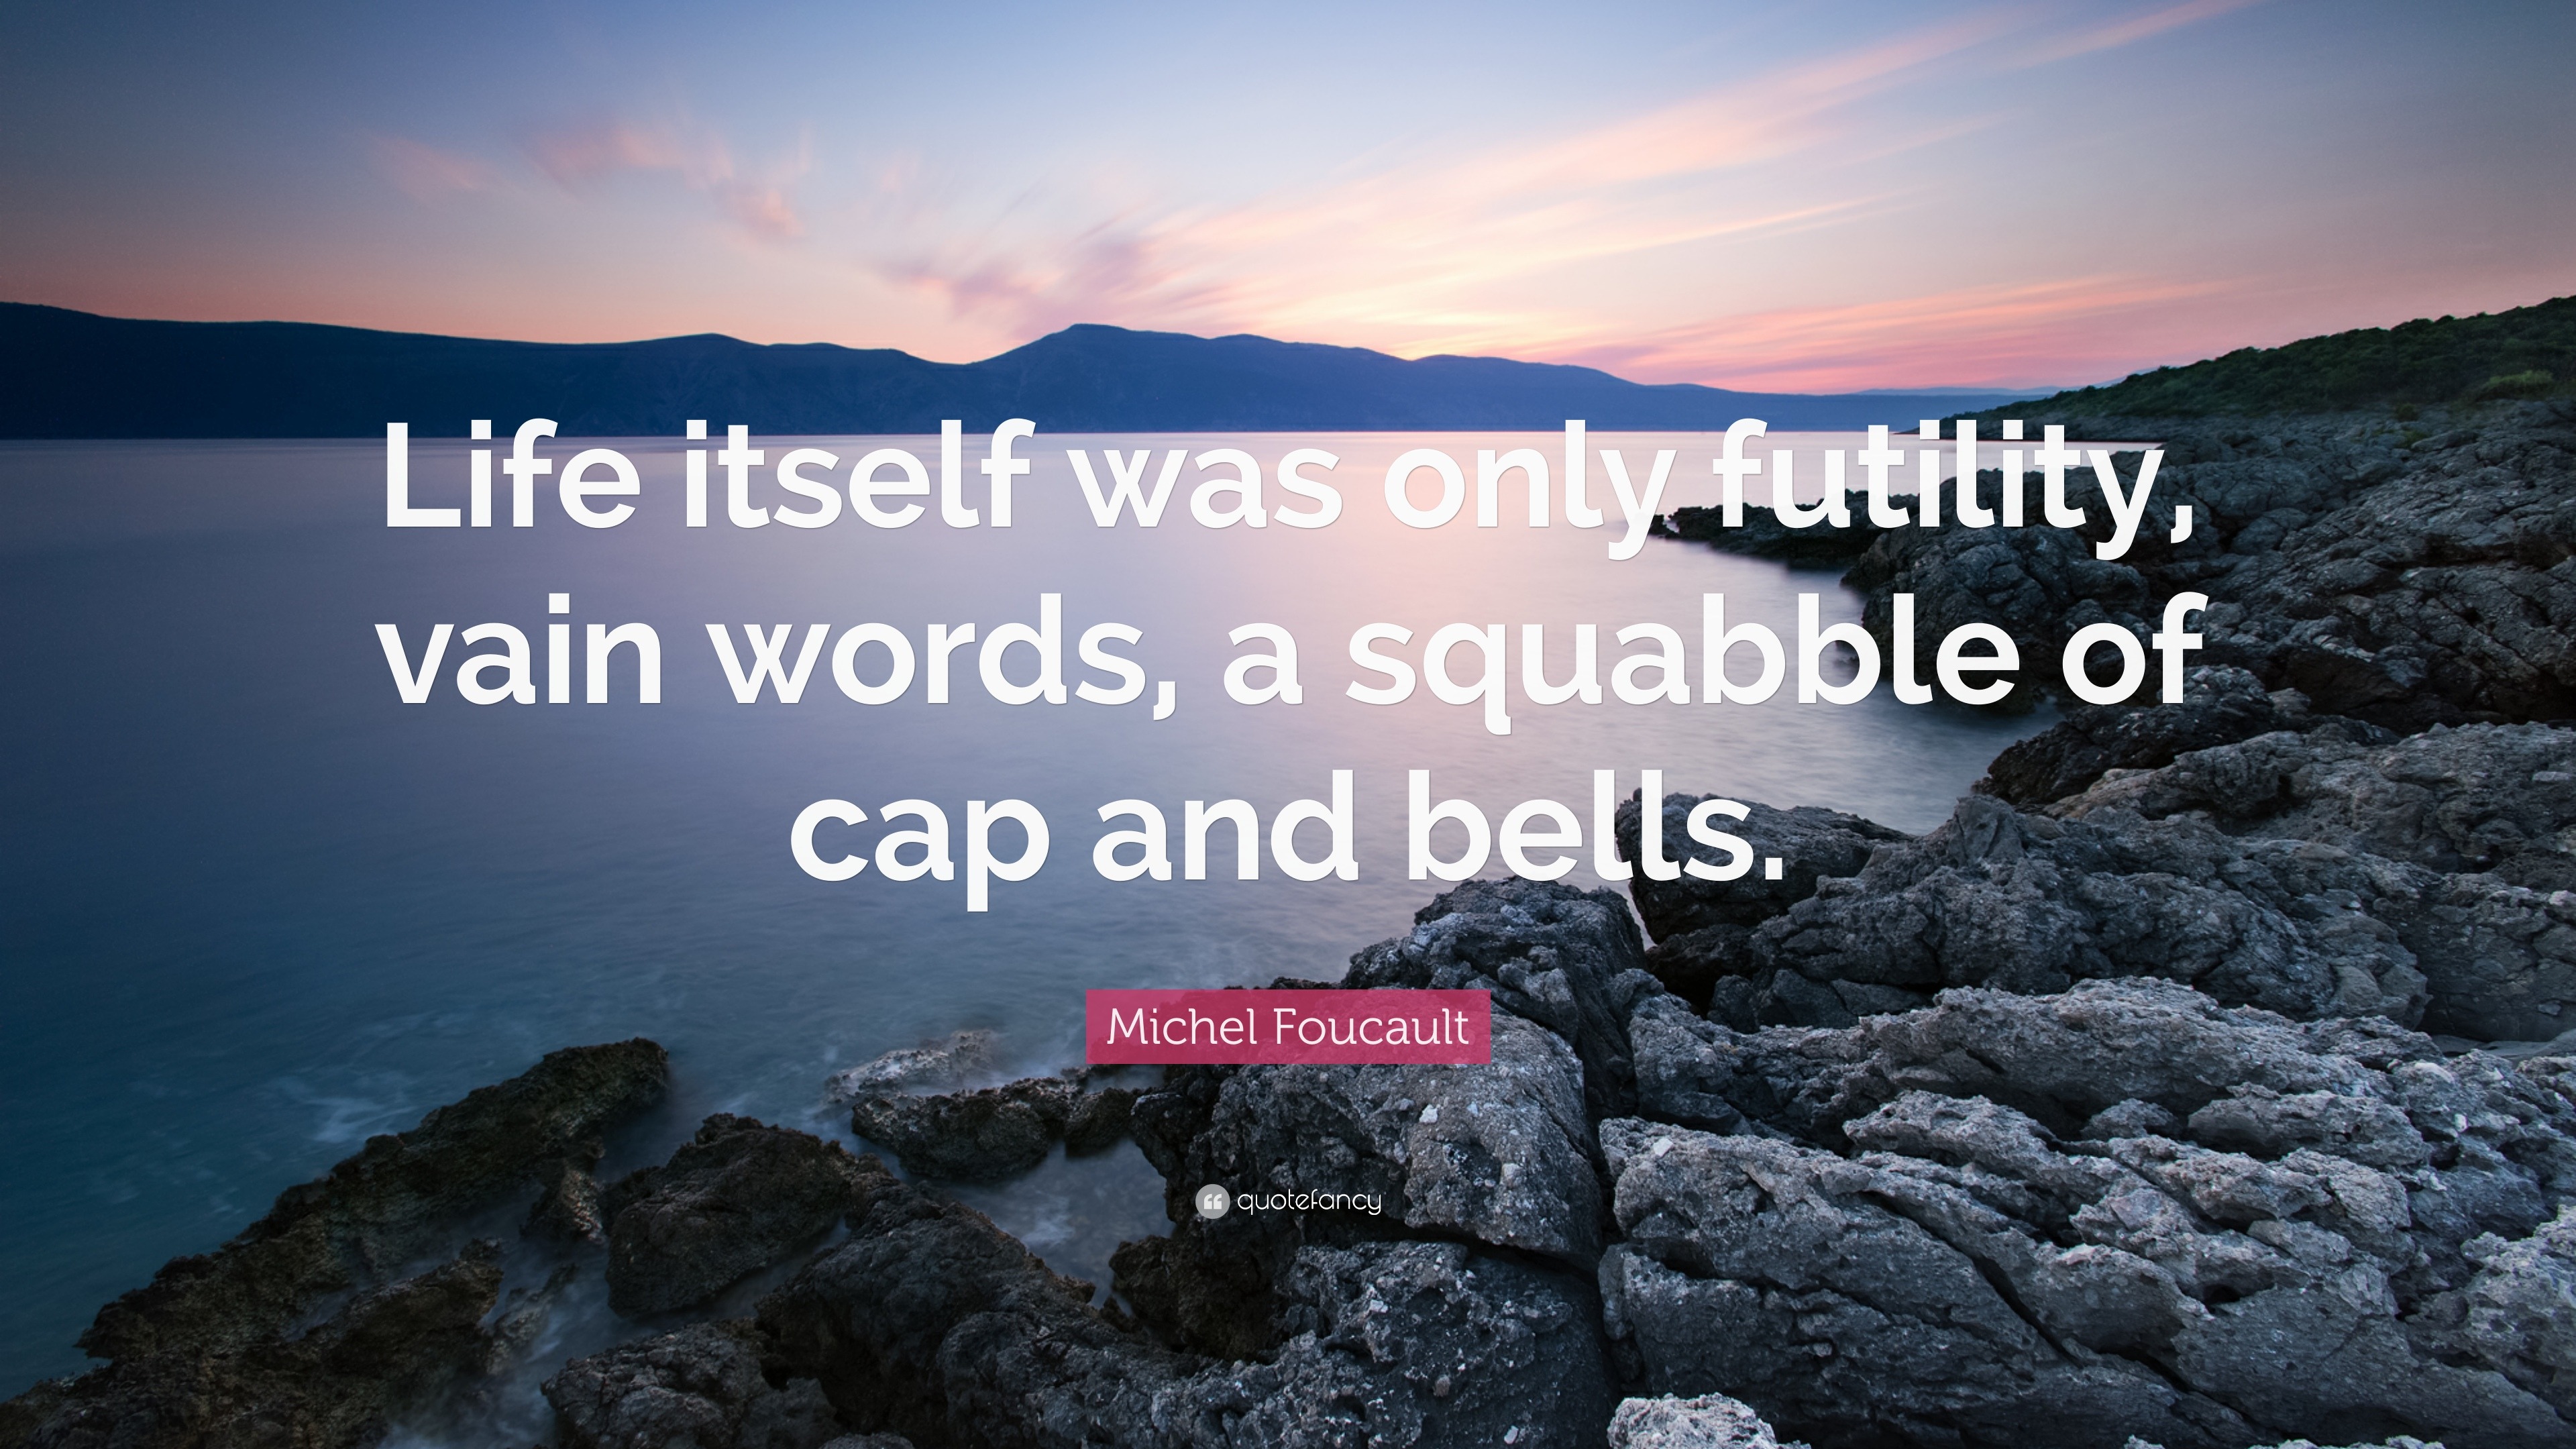 Michel Foucault Quote: “Life itself was only futility, vain words, a ...